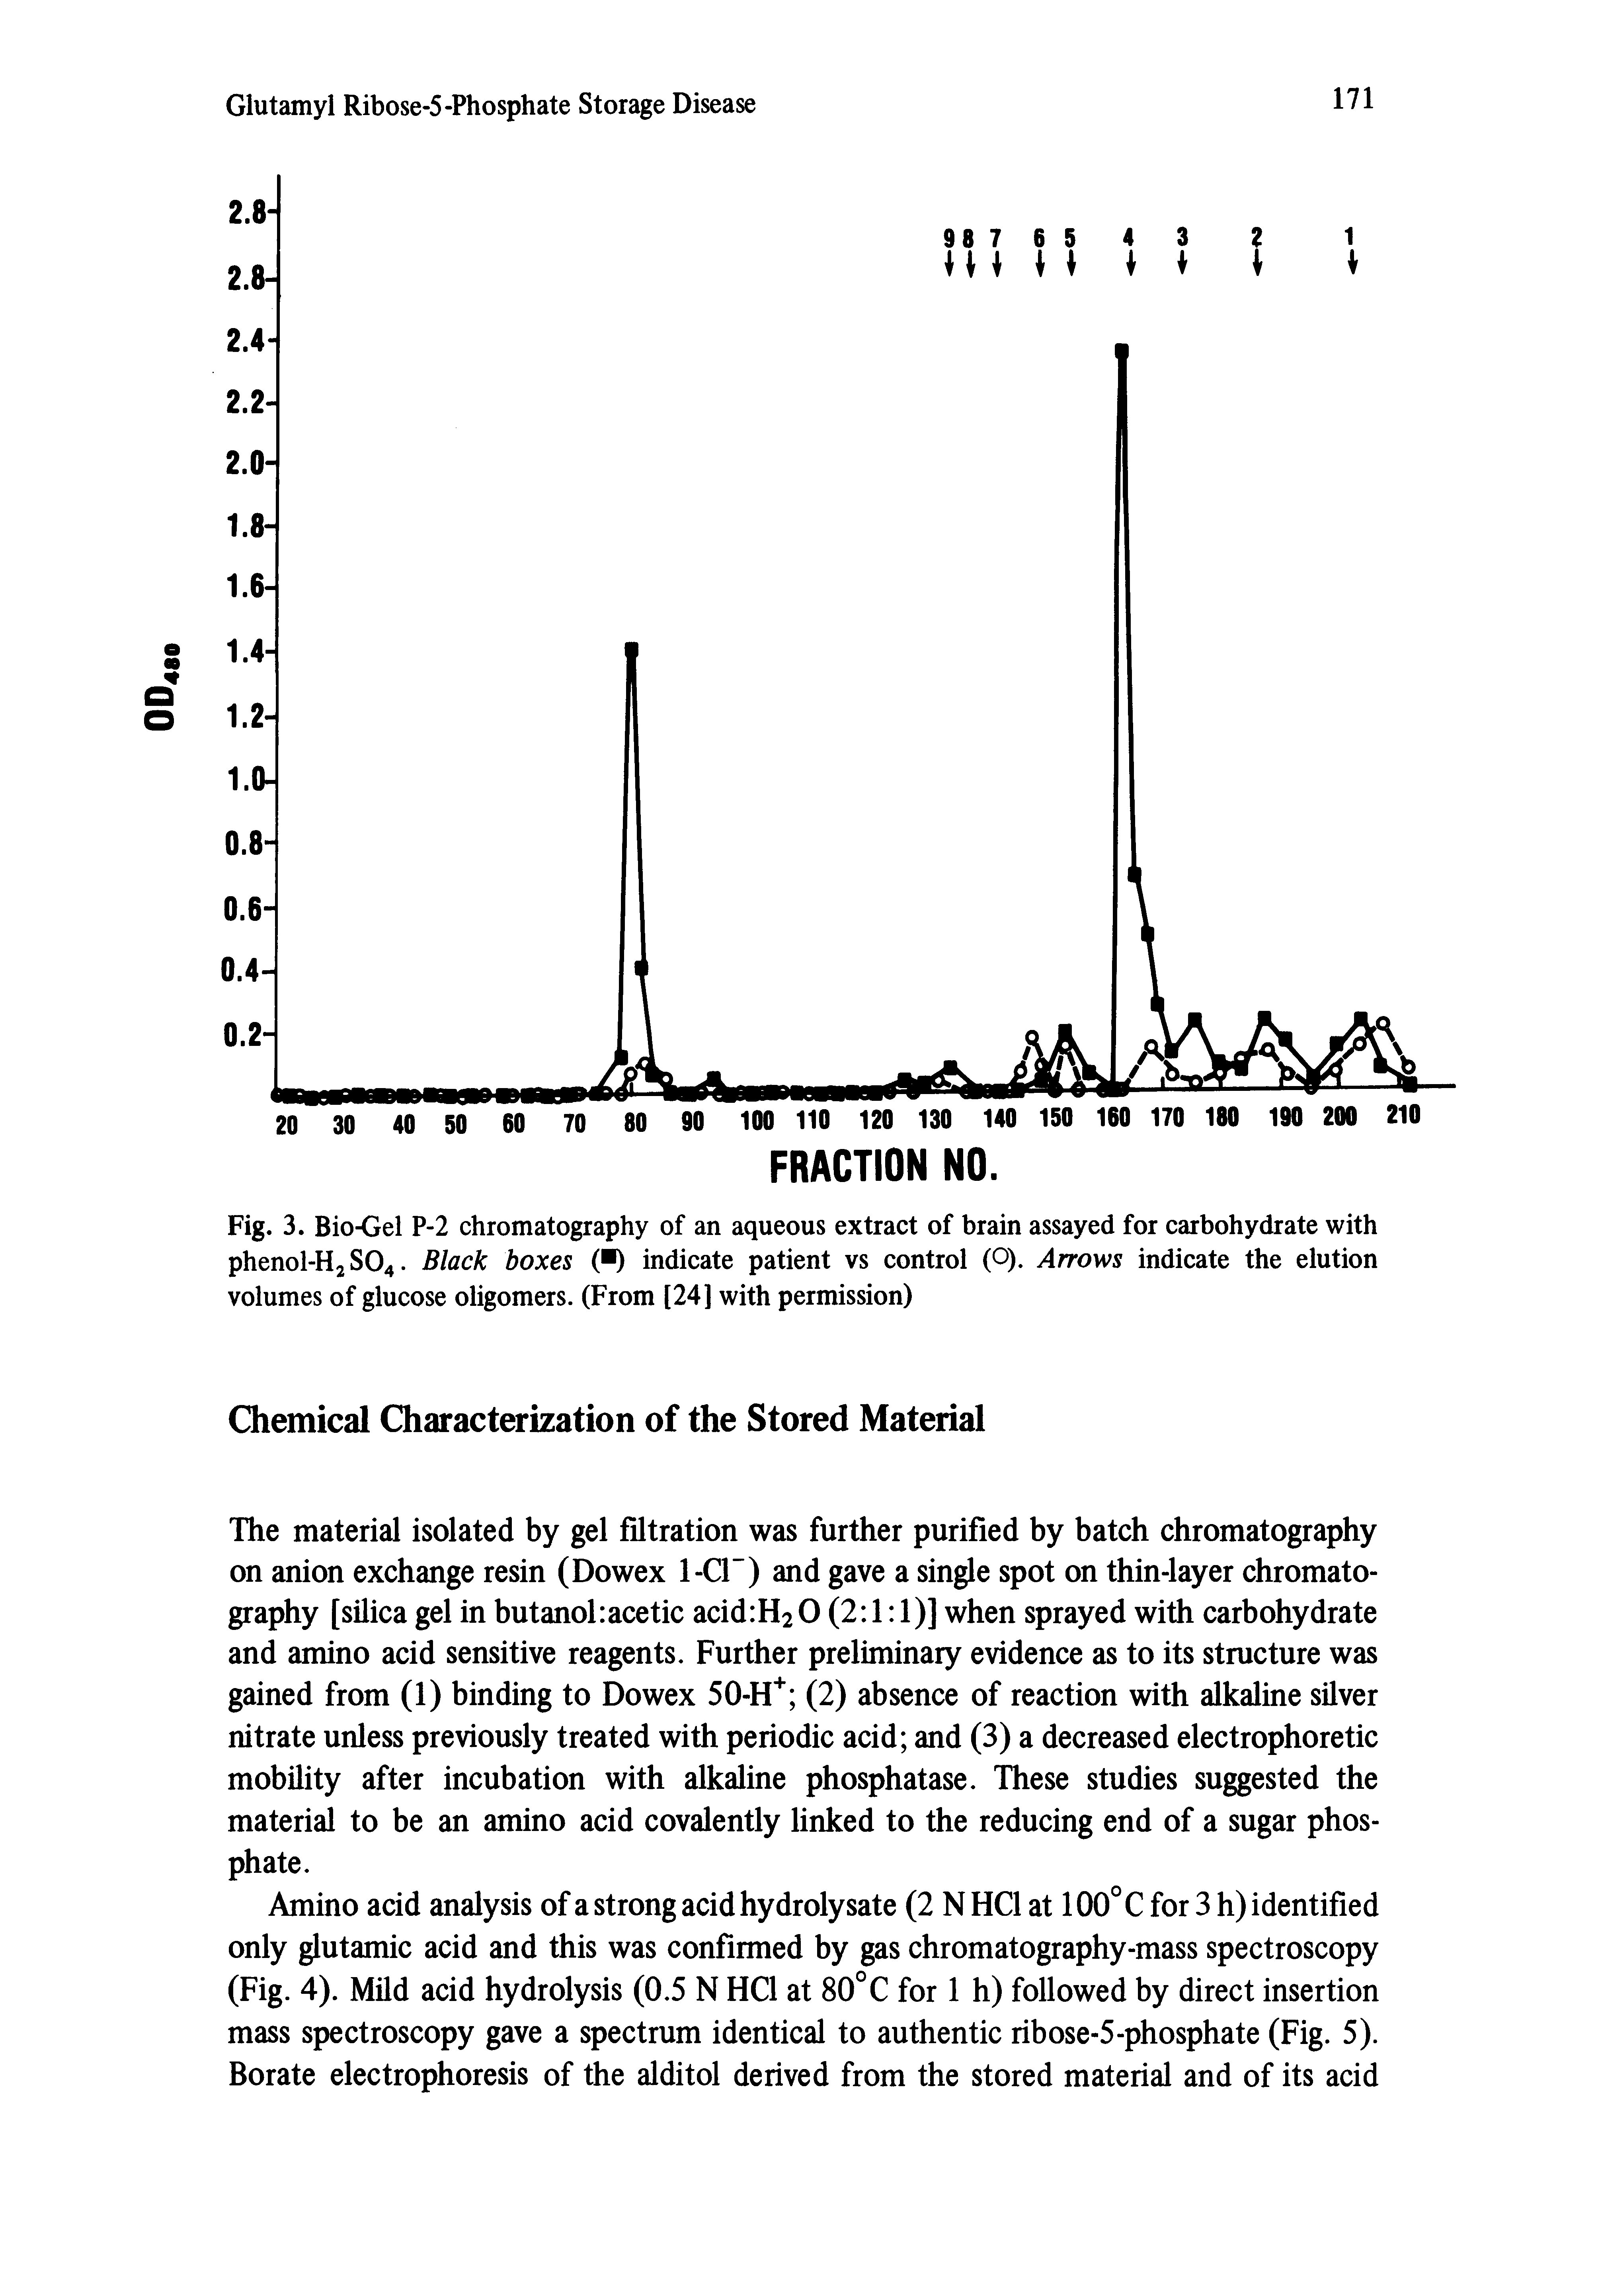 Fig. 3. Bio-Gel P-2 chromatography of an aqueous extract of brain assayed for carbohydrate with phenol-Hj SO4. Black boxes indicate patient vs control (O). Arrows indicate the elution volumes of glucose oligomers. (From [24] with permission)...